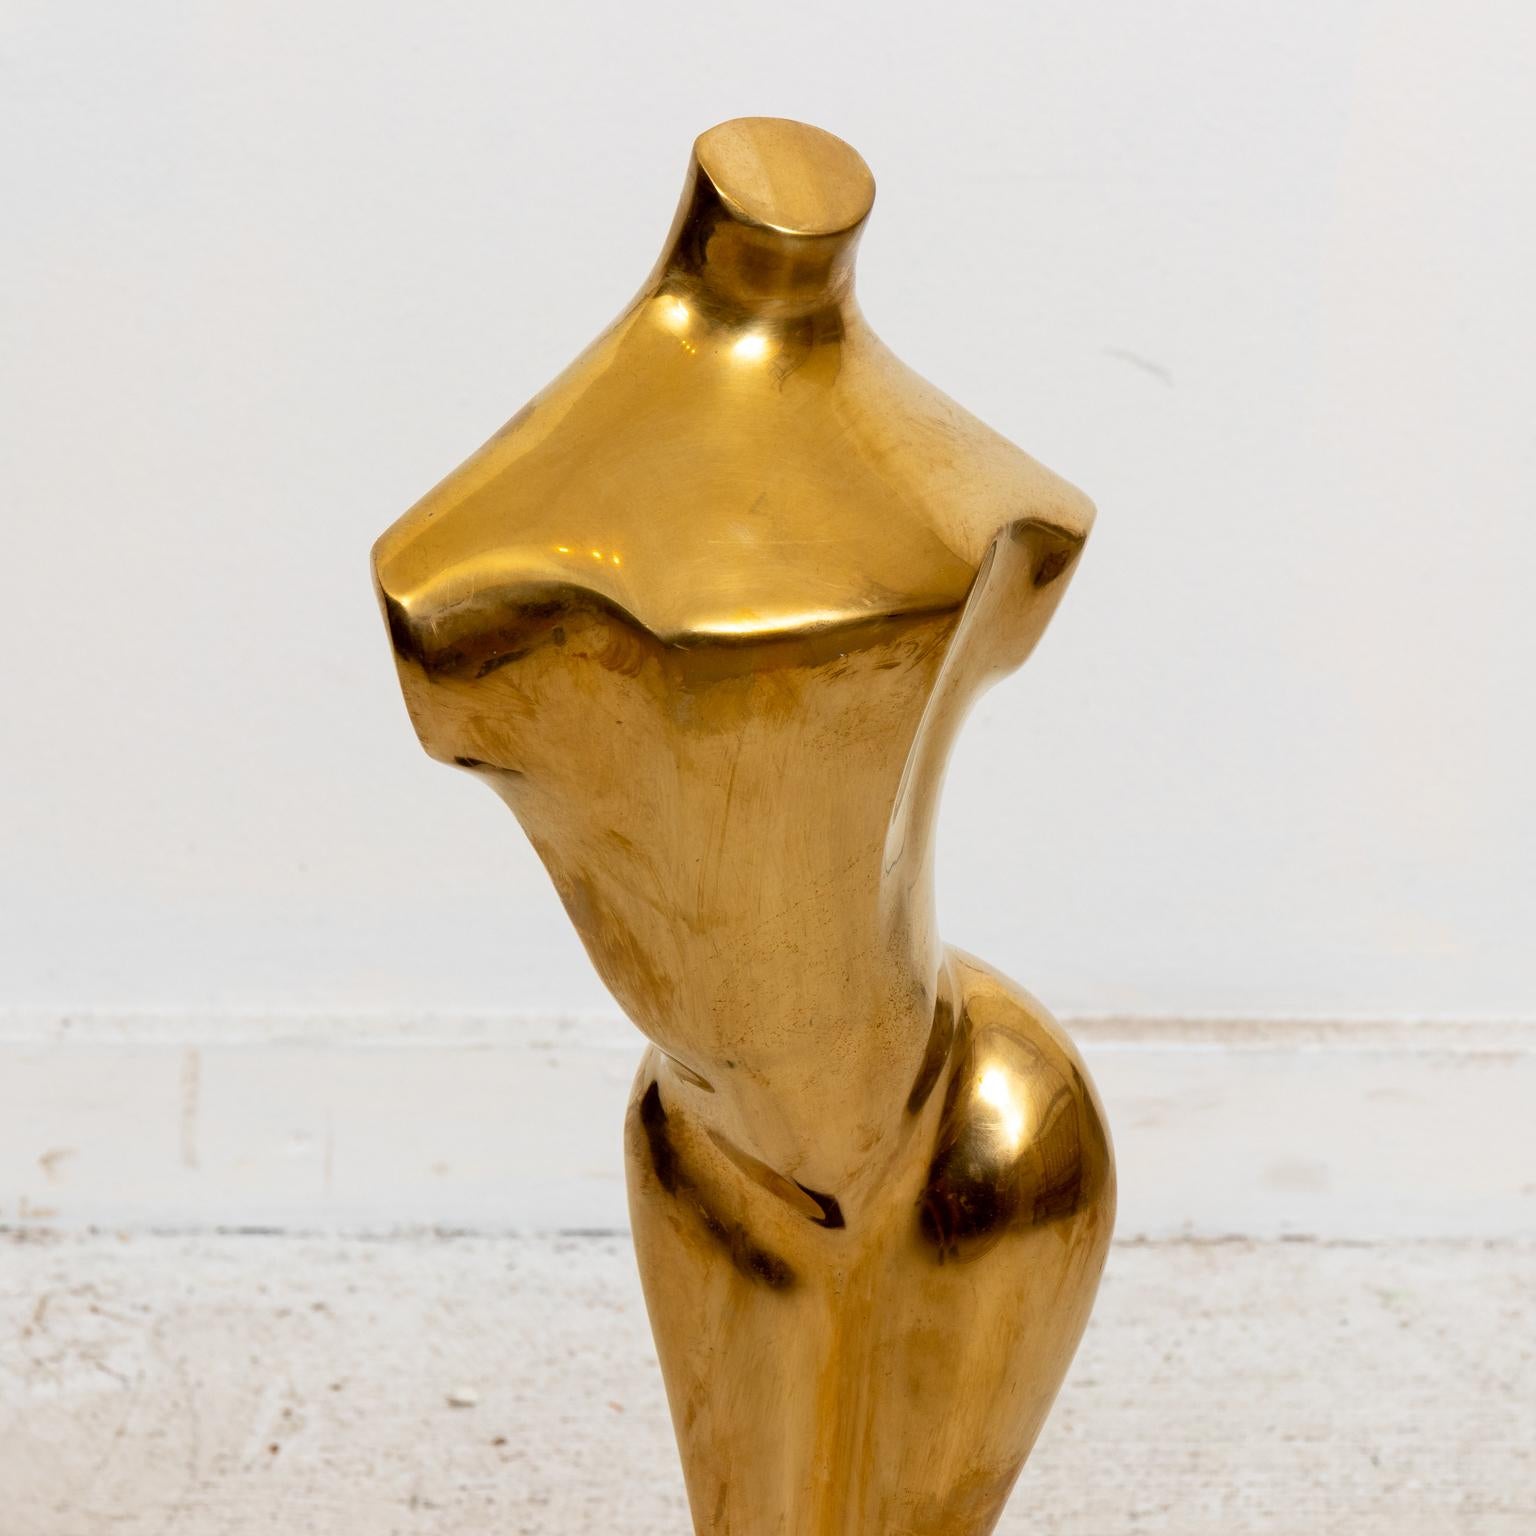 Hollywood Regency style brass nude sculpture on wood base. Good overall condition. Please note of wear consistent with age.